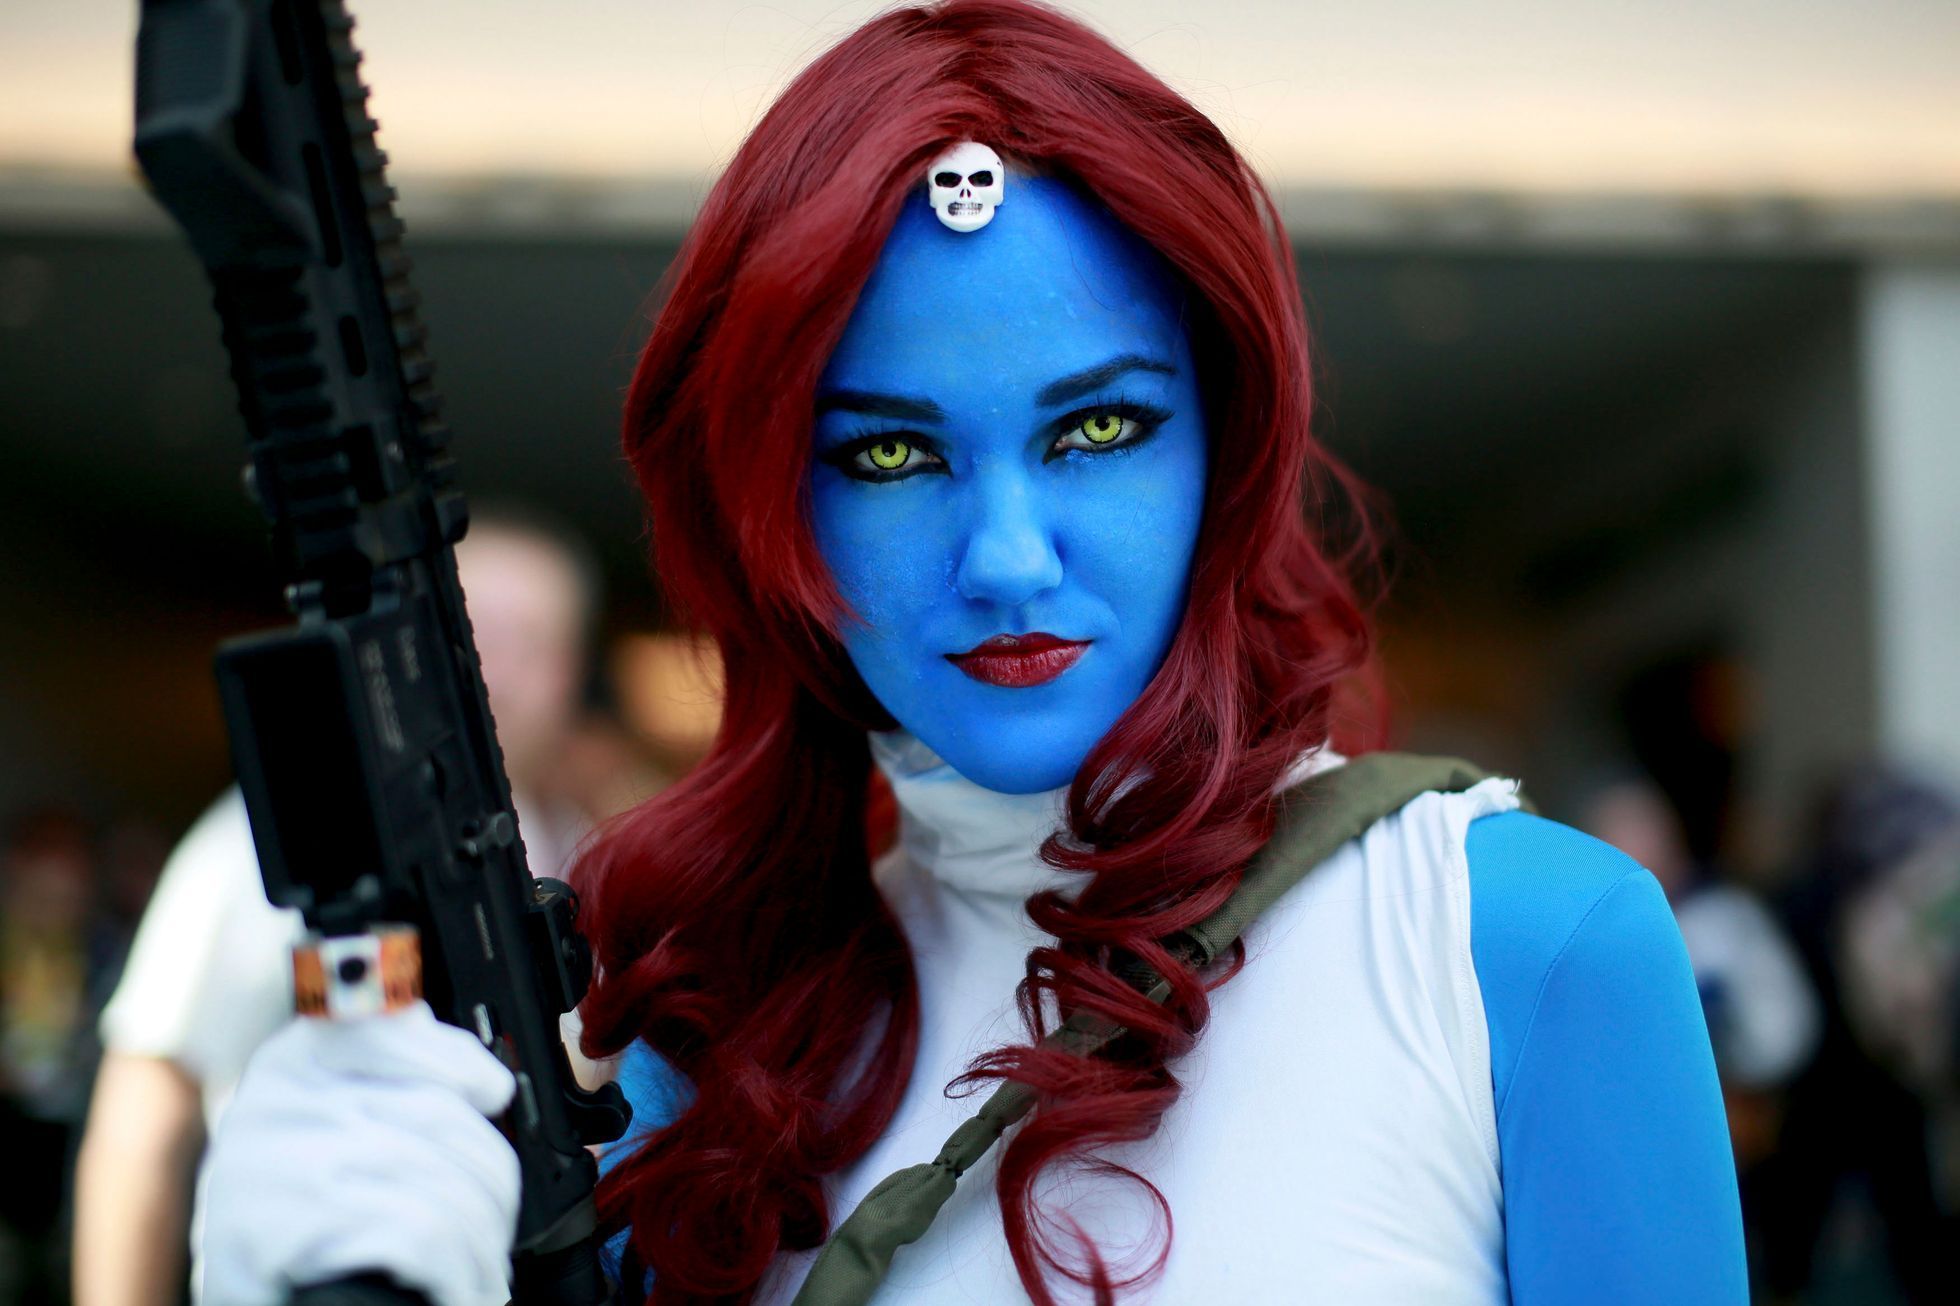 Allie Shaughnessy, who is dressed as Mystique, during the 2014 Comic-Con International Convention in San Diego, California